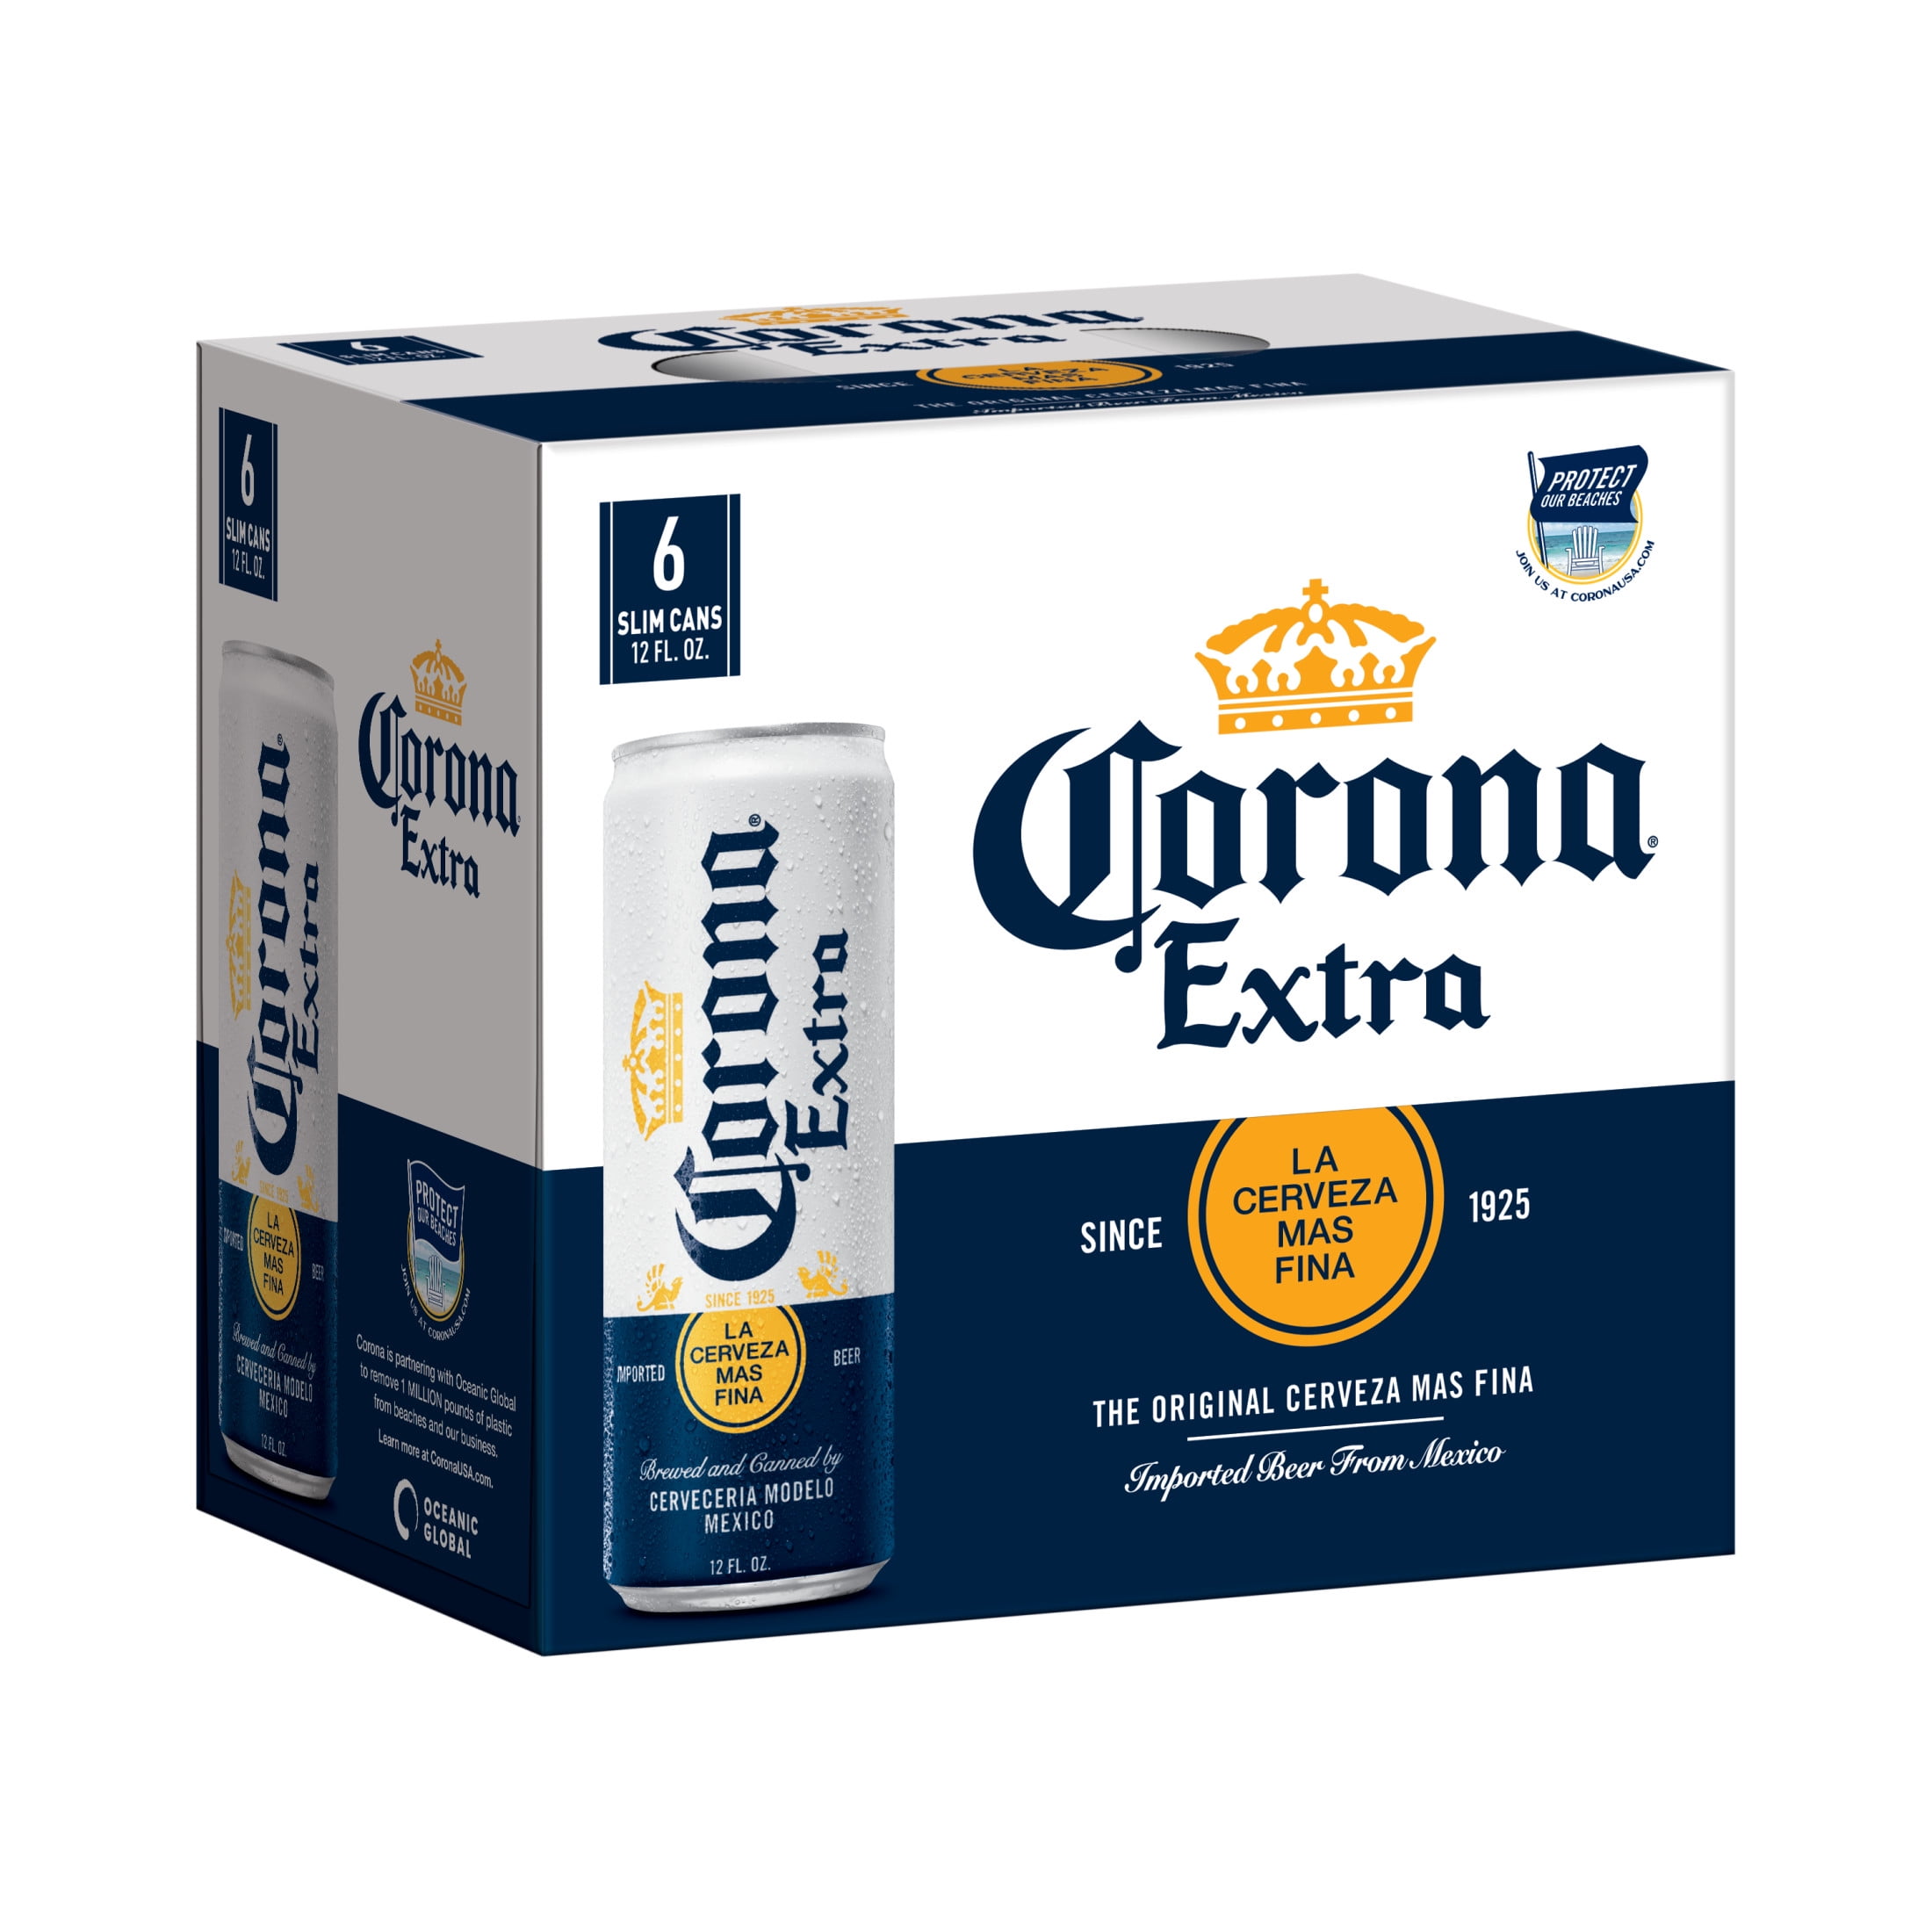 Corona Extra Mexican Lager Import Beer, 6 Pack, 12 fl oz Aluminum Cans ...